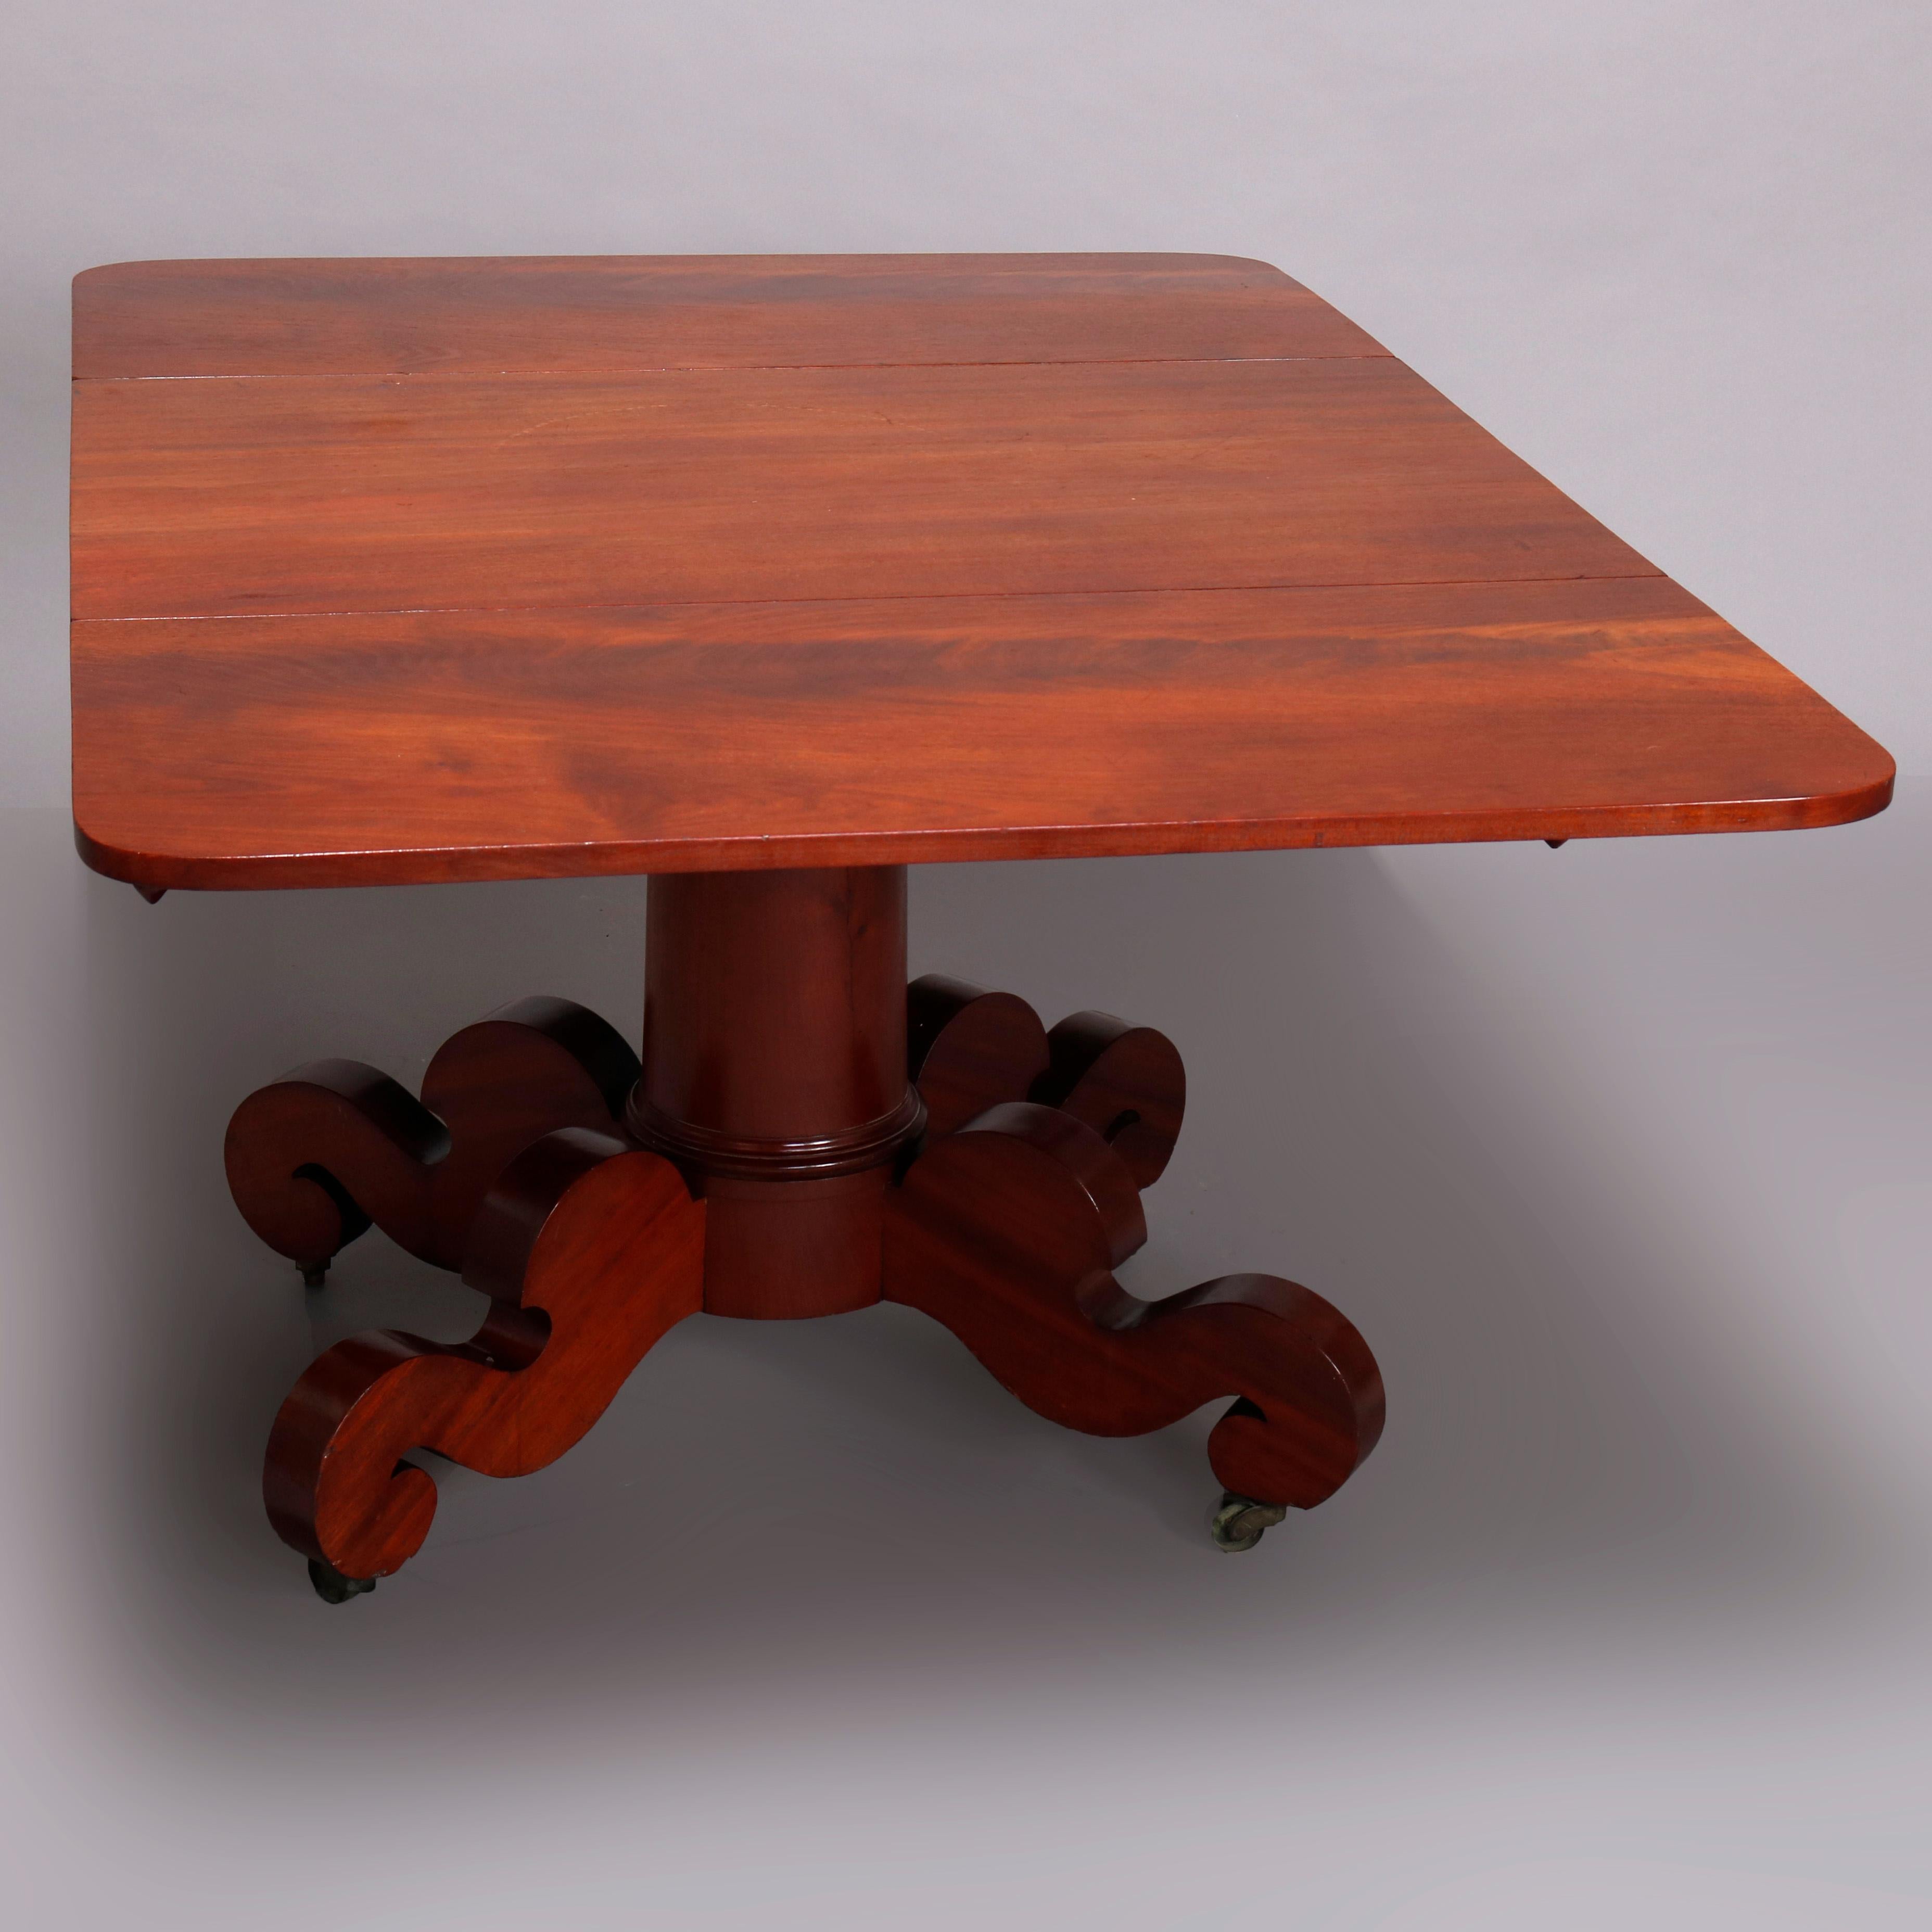 An antique American 
empire table in the manner of Joseph Meeks offers mahogany construction with top having drop leaves and raised on pedestal base with scroll form feet, c1840

Measures- 39